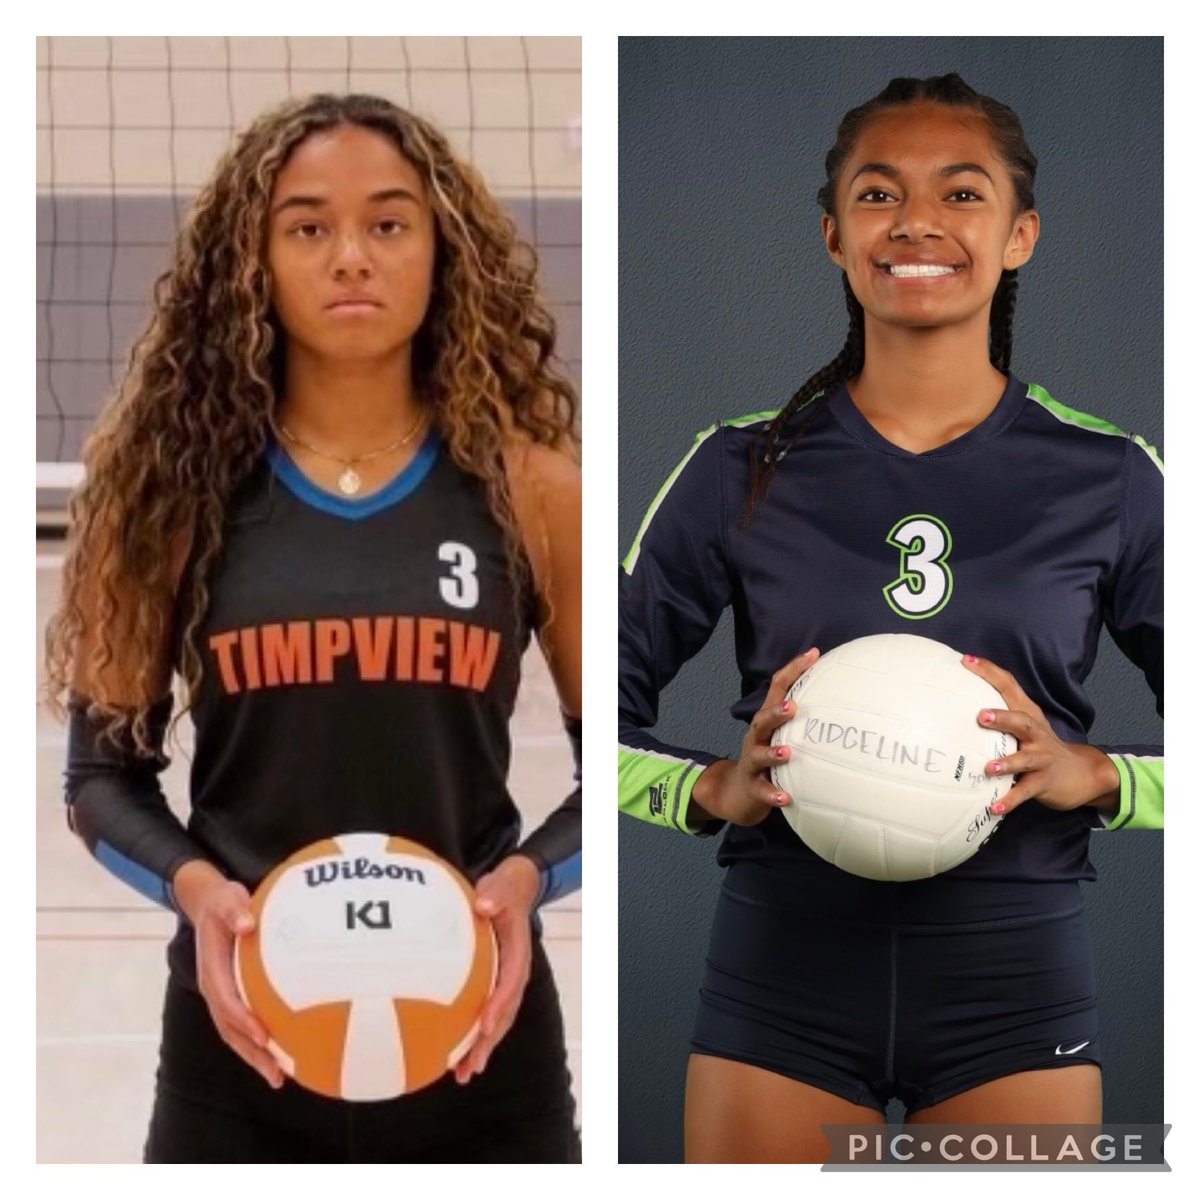 THE BATTLE OF THE DAMUNI GIRLS!!! Tonite 6:00 pm in The ThunderDome at Timpview High School. BYU bound setter @DamuniSilina and GONZAGA bound setter @niadamuni go head to head. TIME TO TAKE CARE OF SOME FAMILY BUSINESS!!! #DamuniStrong 🤟🏾 🇫🇯“DAS MY GIRLS!!”🇹🇴